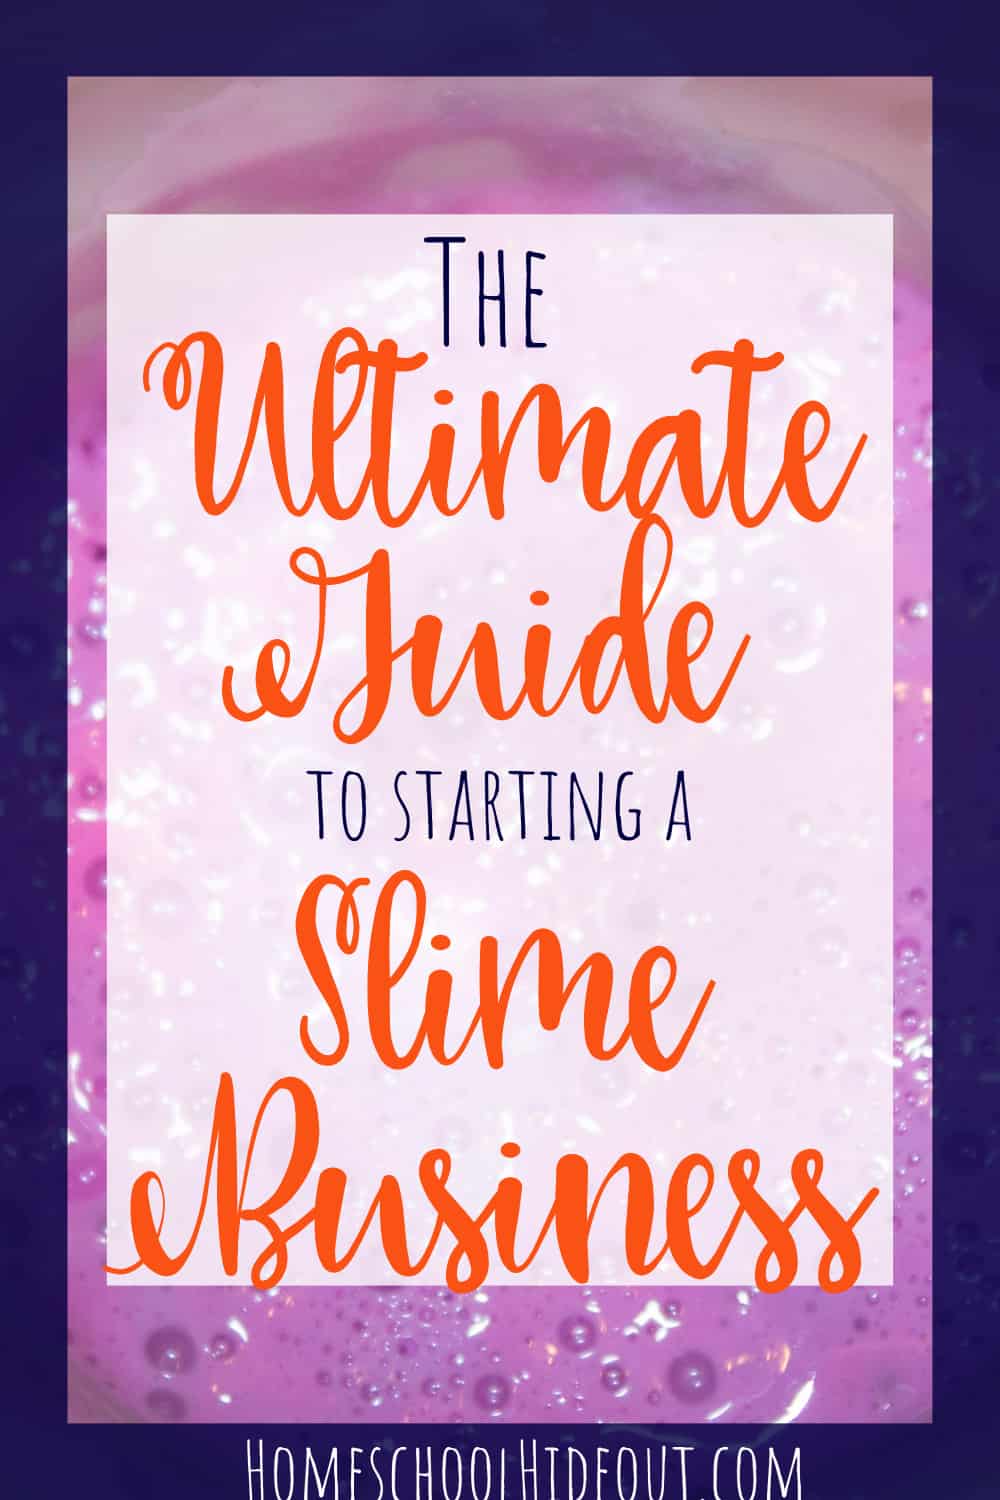 DIY Slime Business: A Step-By-Step Guide to Entrepreneurship!